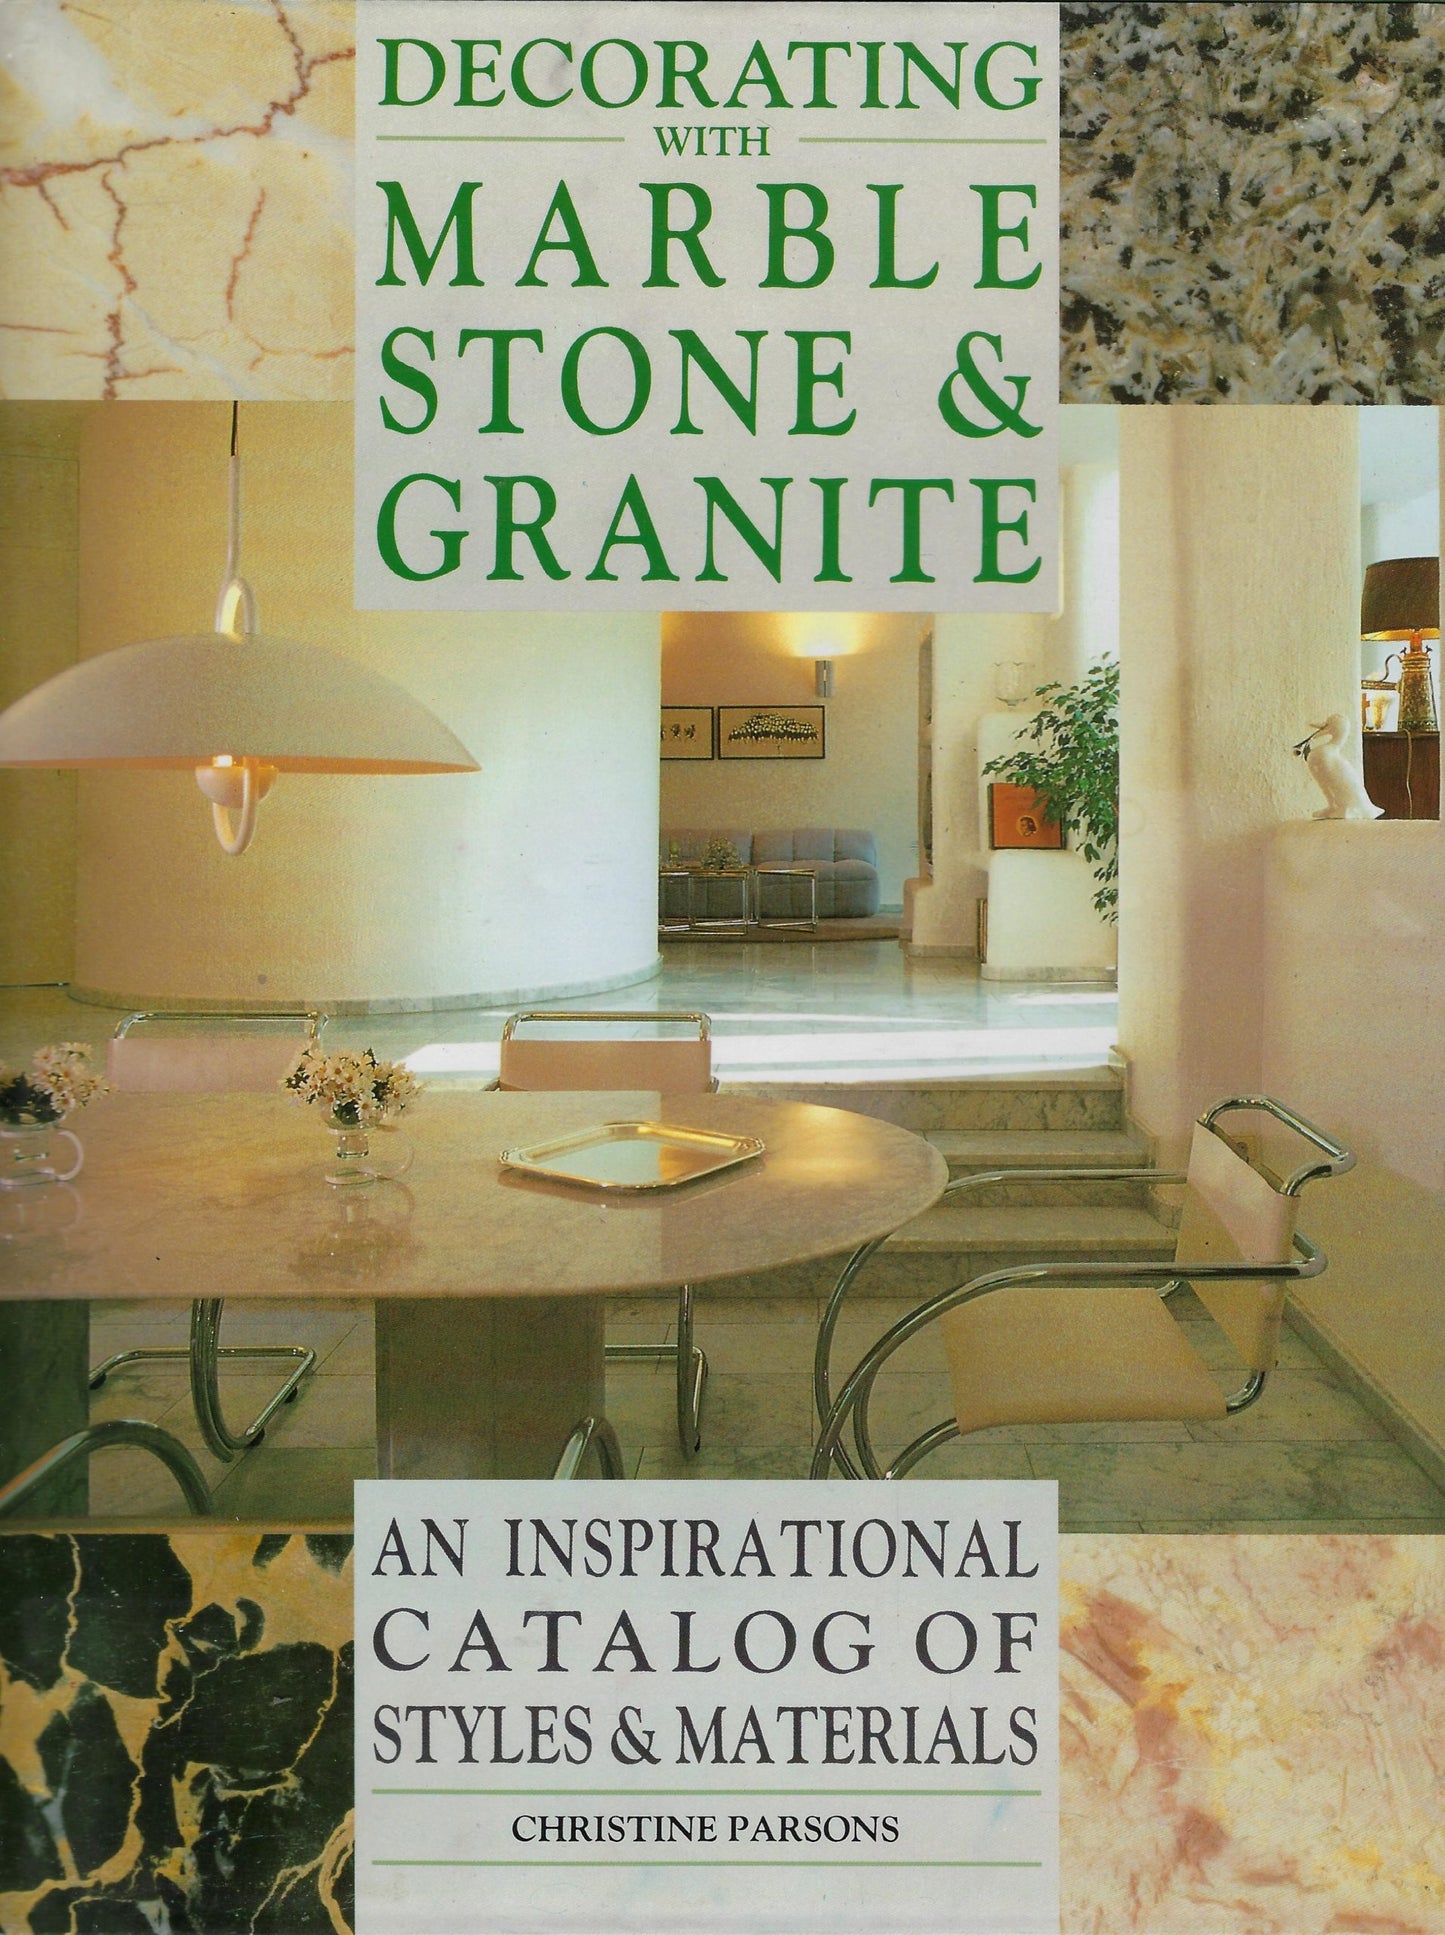 Decorating with marble stone & granite